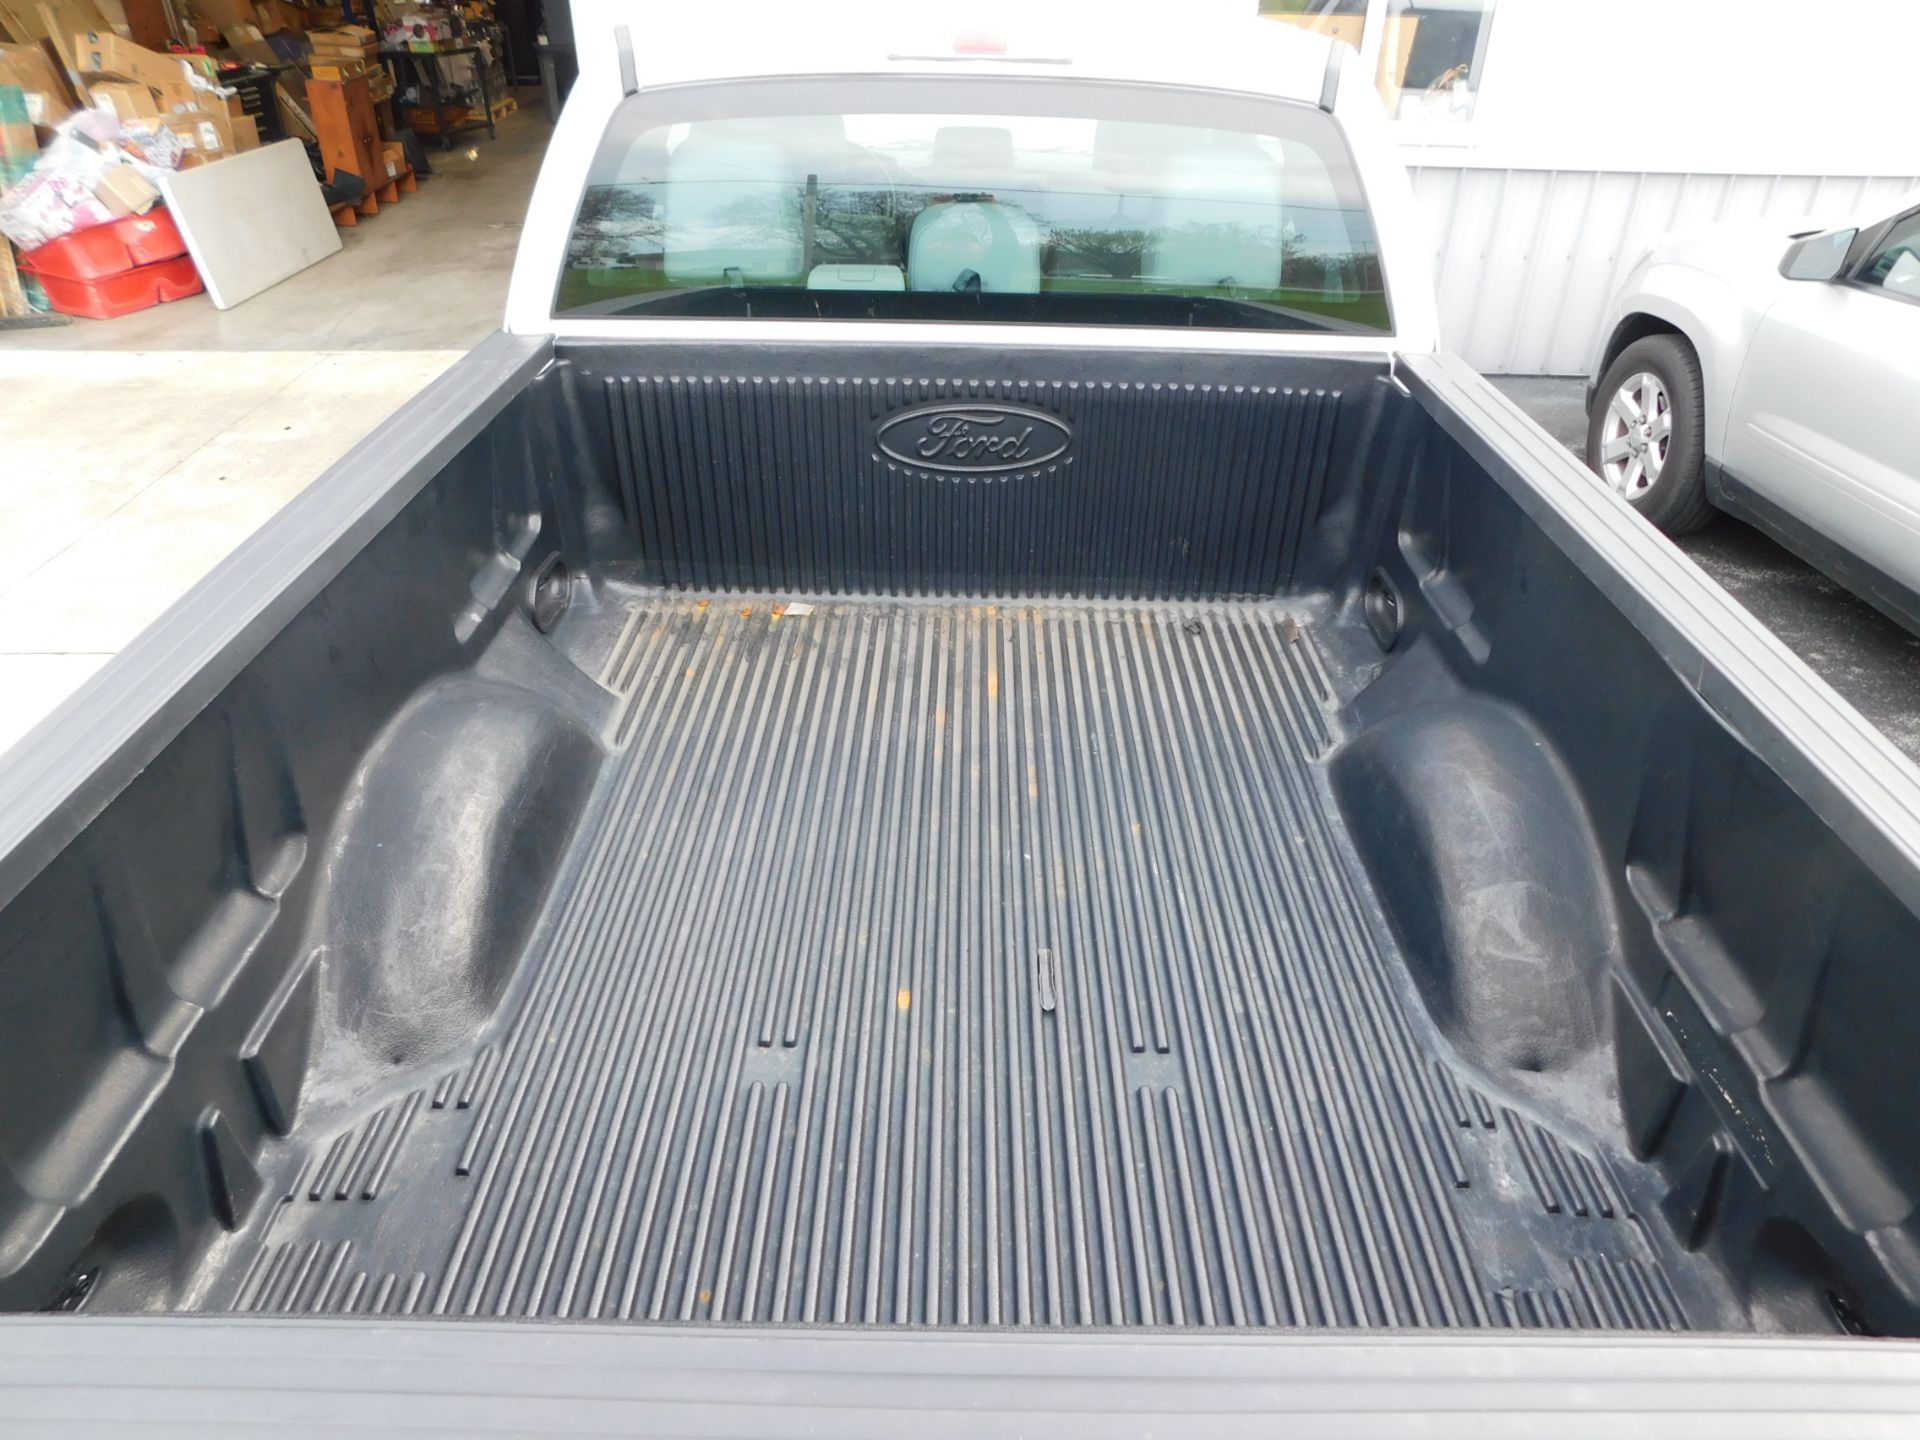 2012 Ford F-150XL Pickup VIN 1FTEX1EM1CFB57282, 4WD, Extended Cab, Automatic, AC< PW - Image 11 of 37